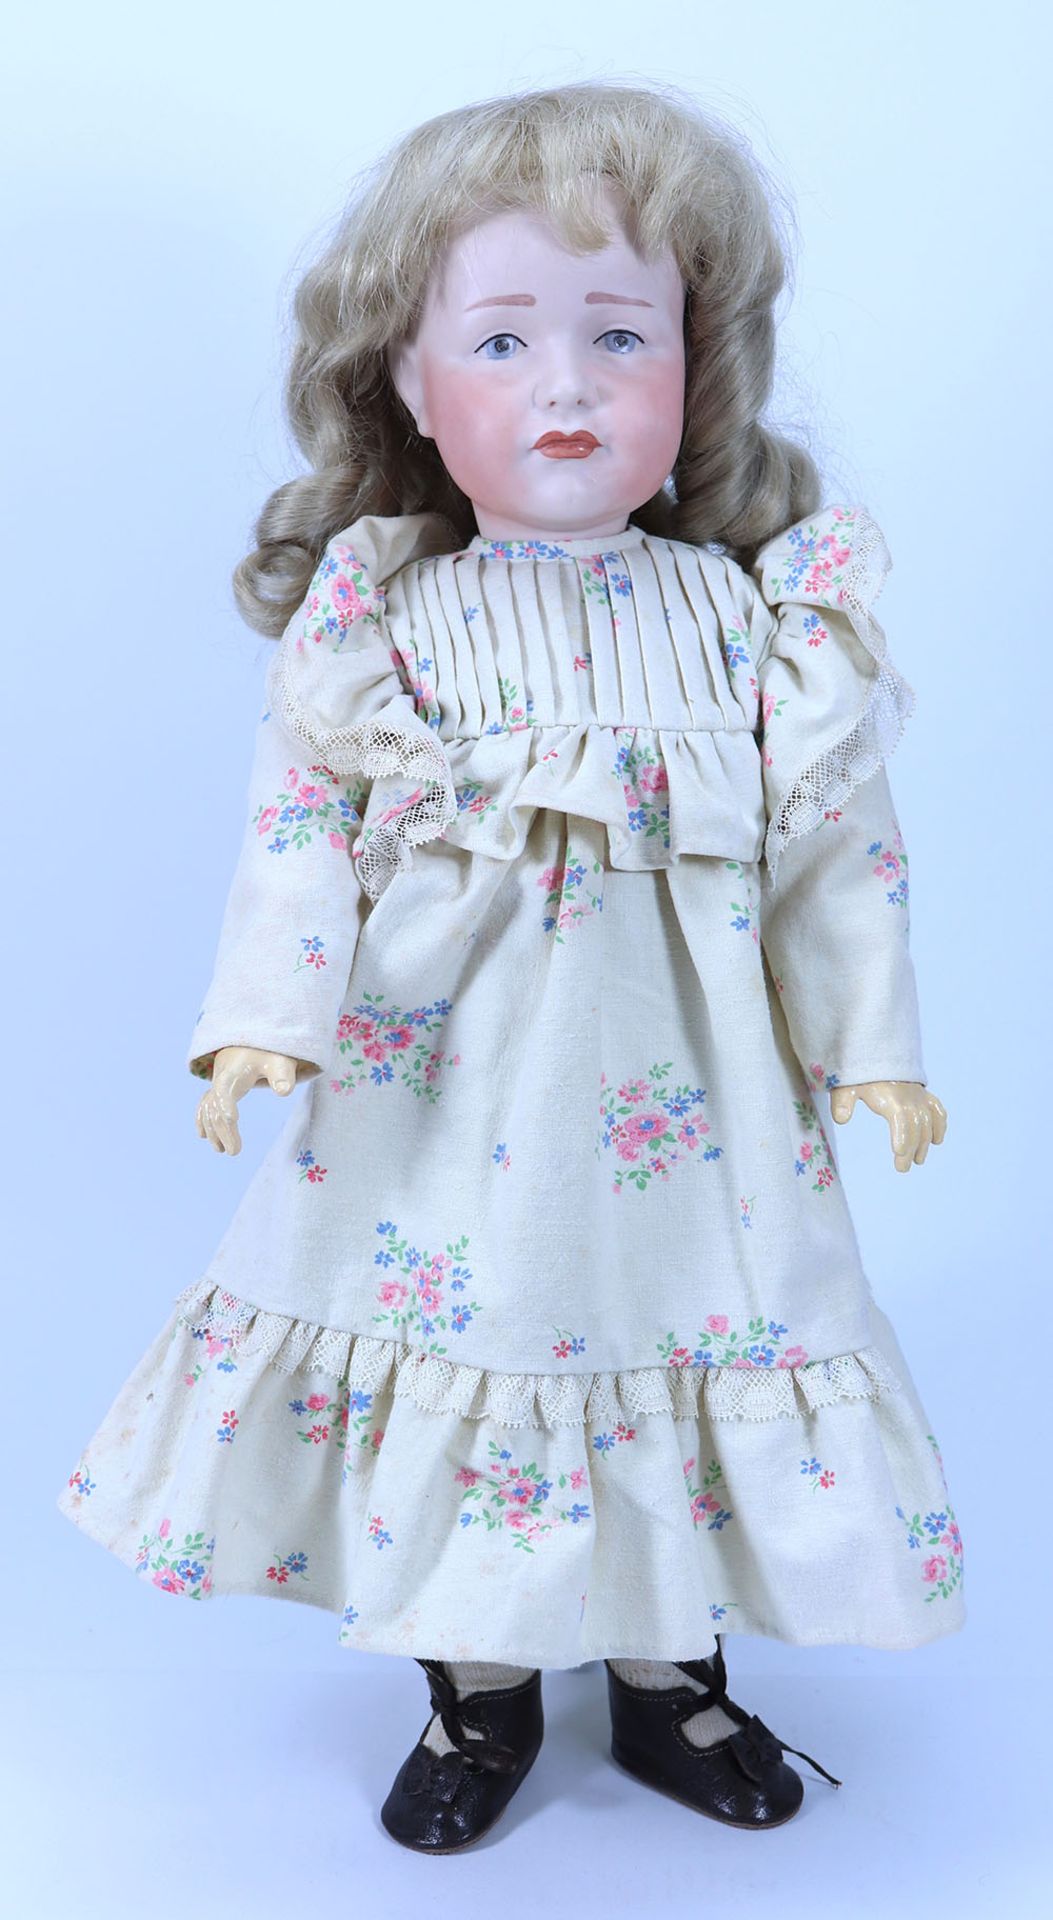 A reproduction Kammer & Reinhardt 114 bisque head doll, 1982